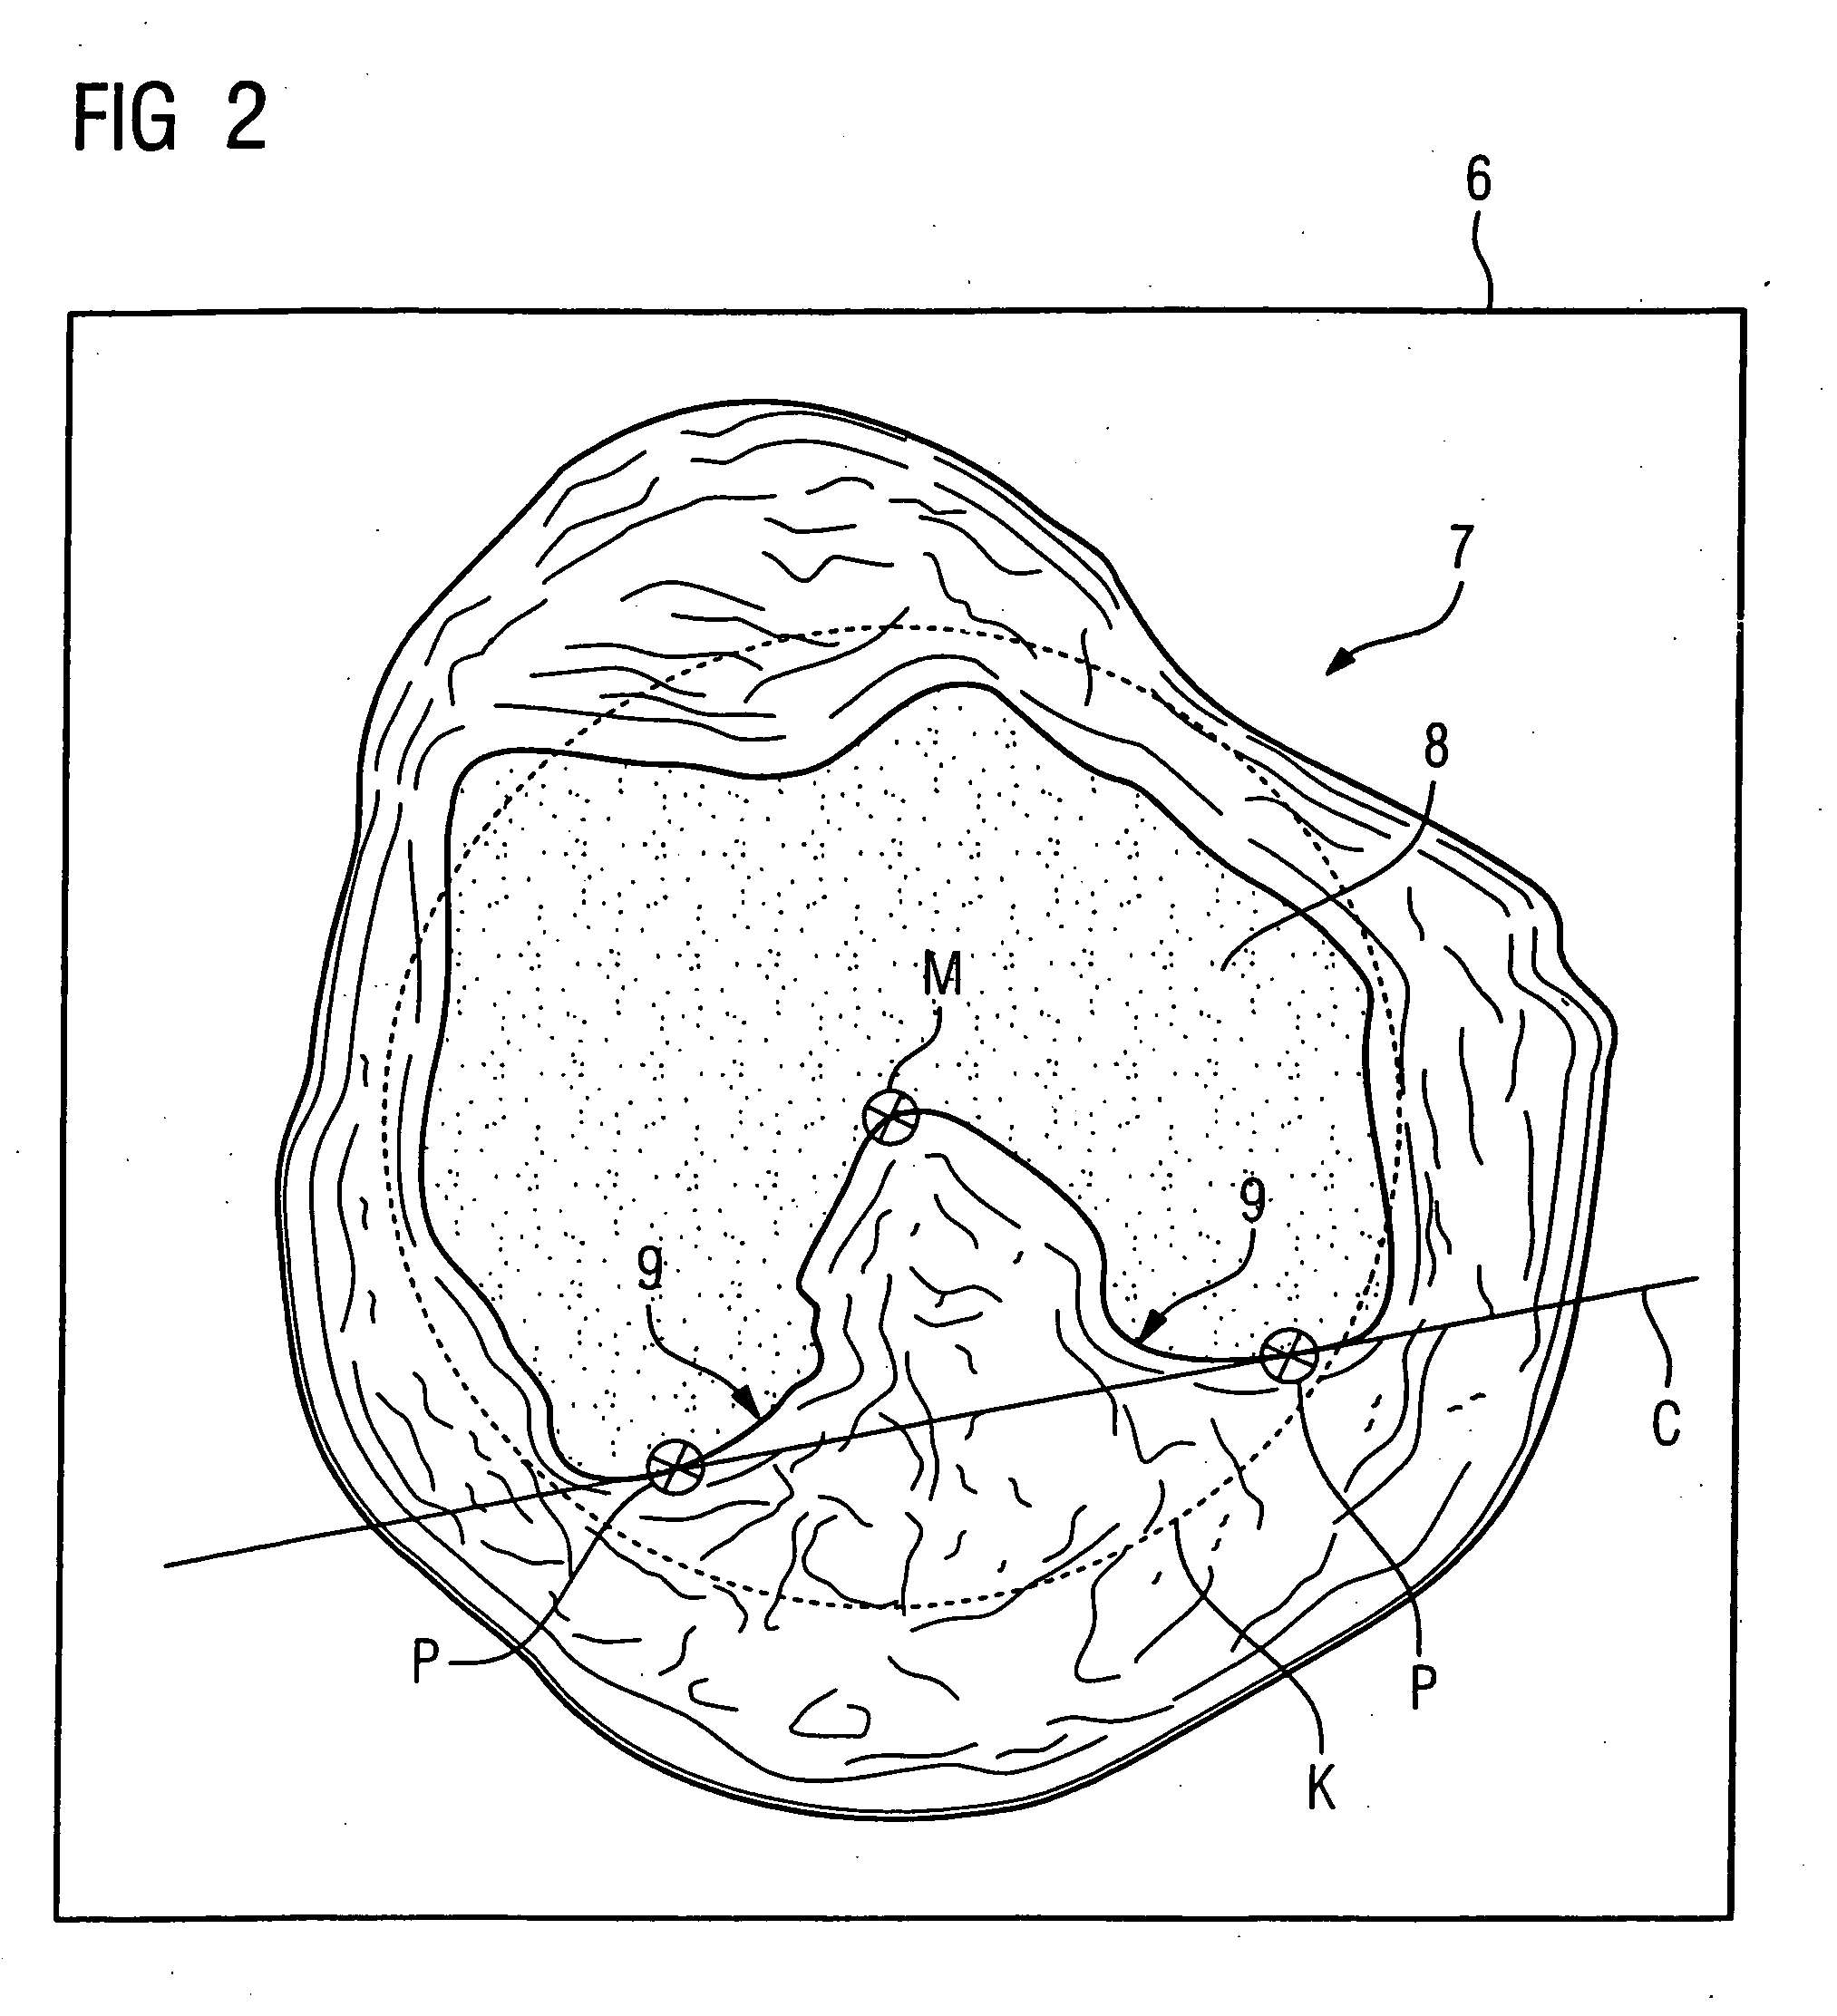 Mr method and apparatus for determining coronal and sagittal image planes from an image data set of a knee joint